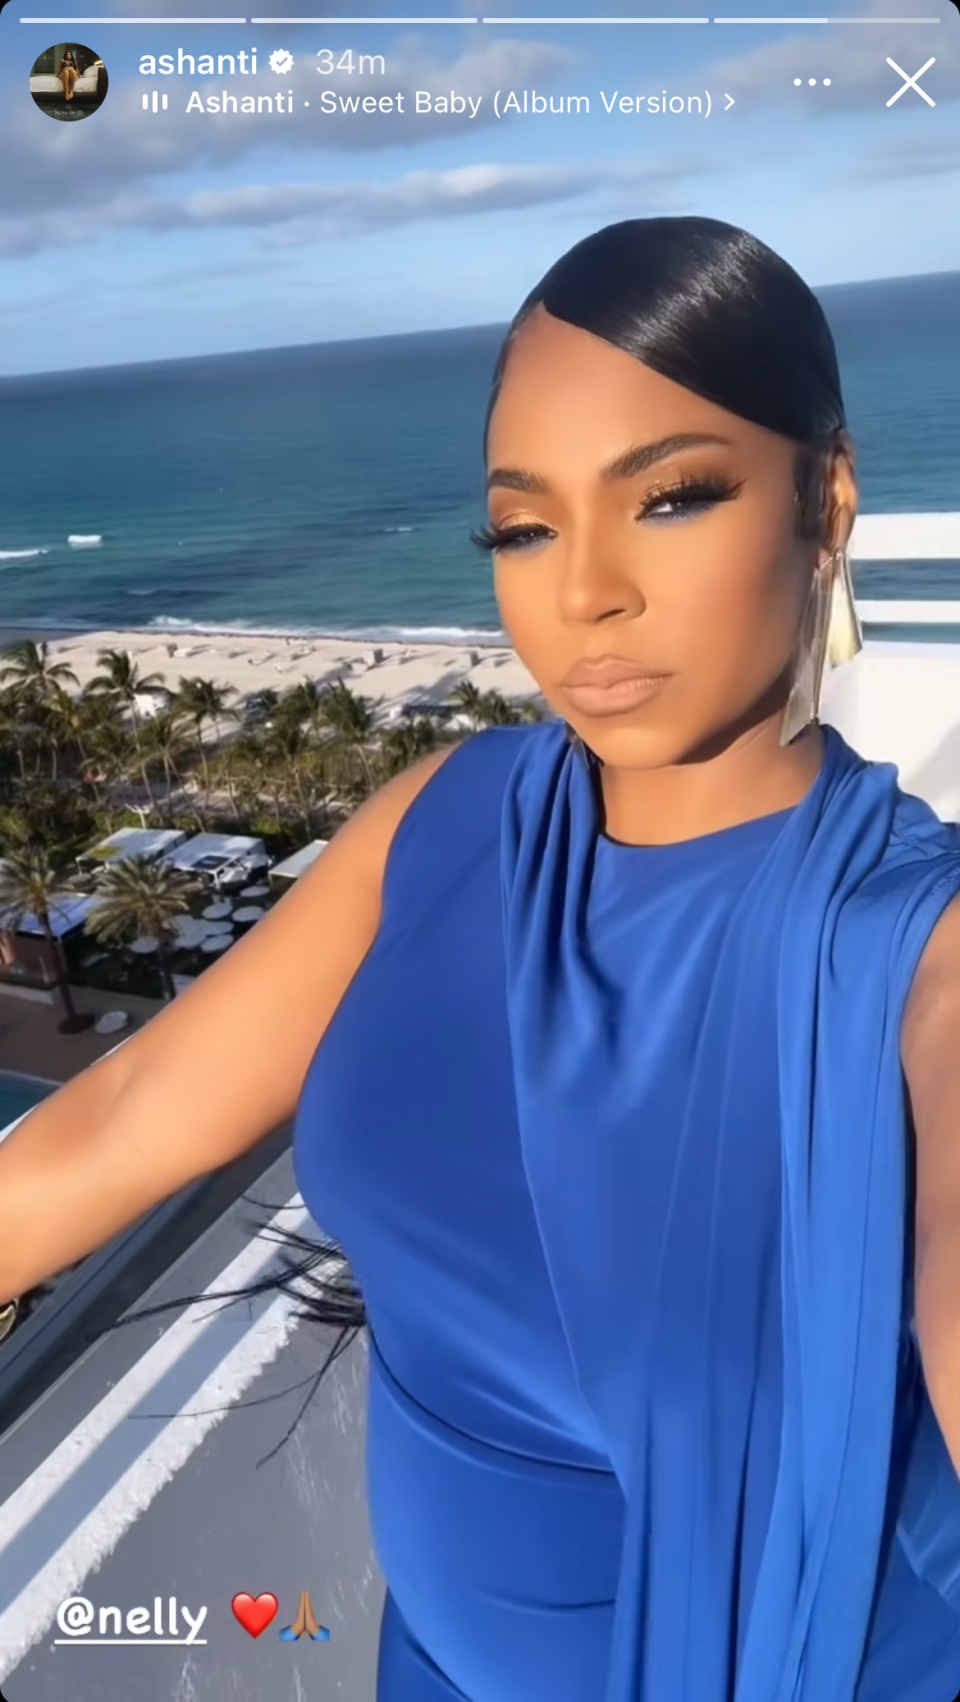 Ashanti poses in a sleeveless blue gown with large earrings, palm trees, and buildings in the background